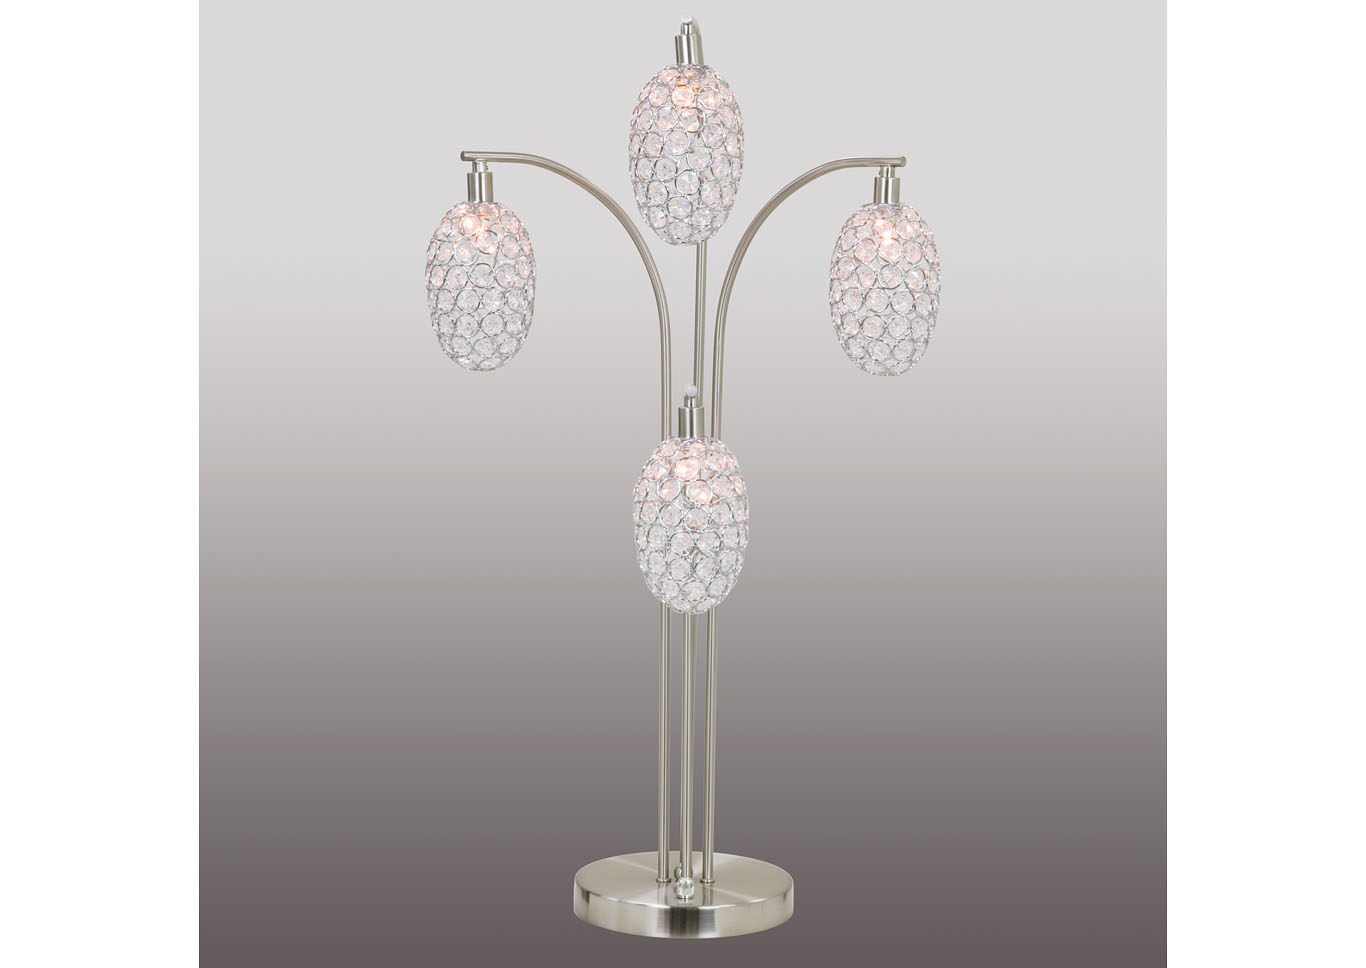 32"H TABLE LAMP,Instore